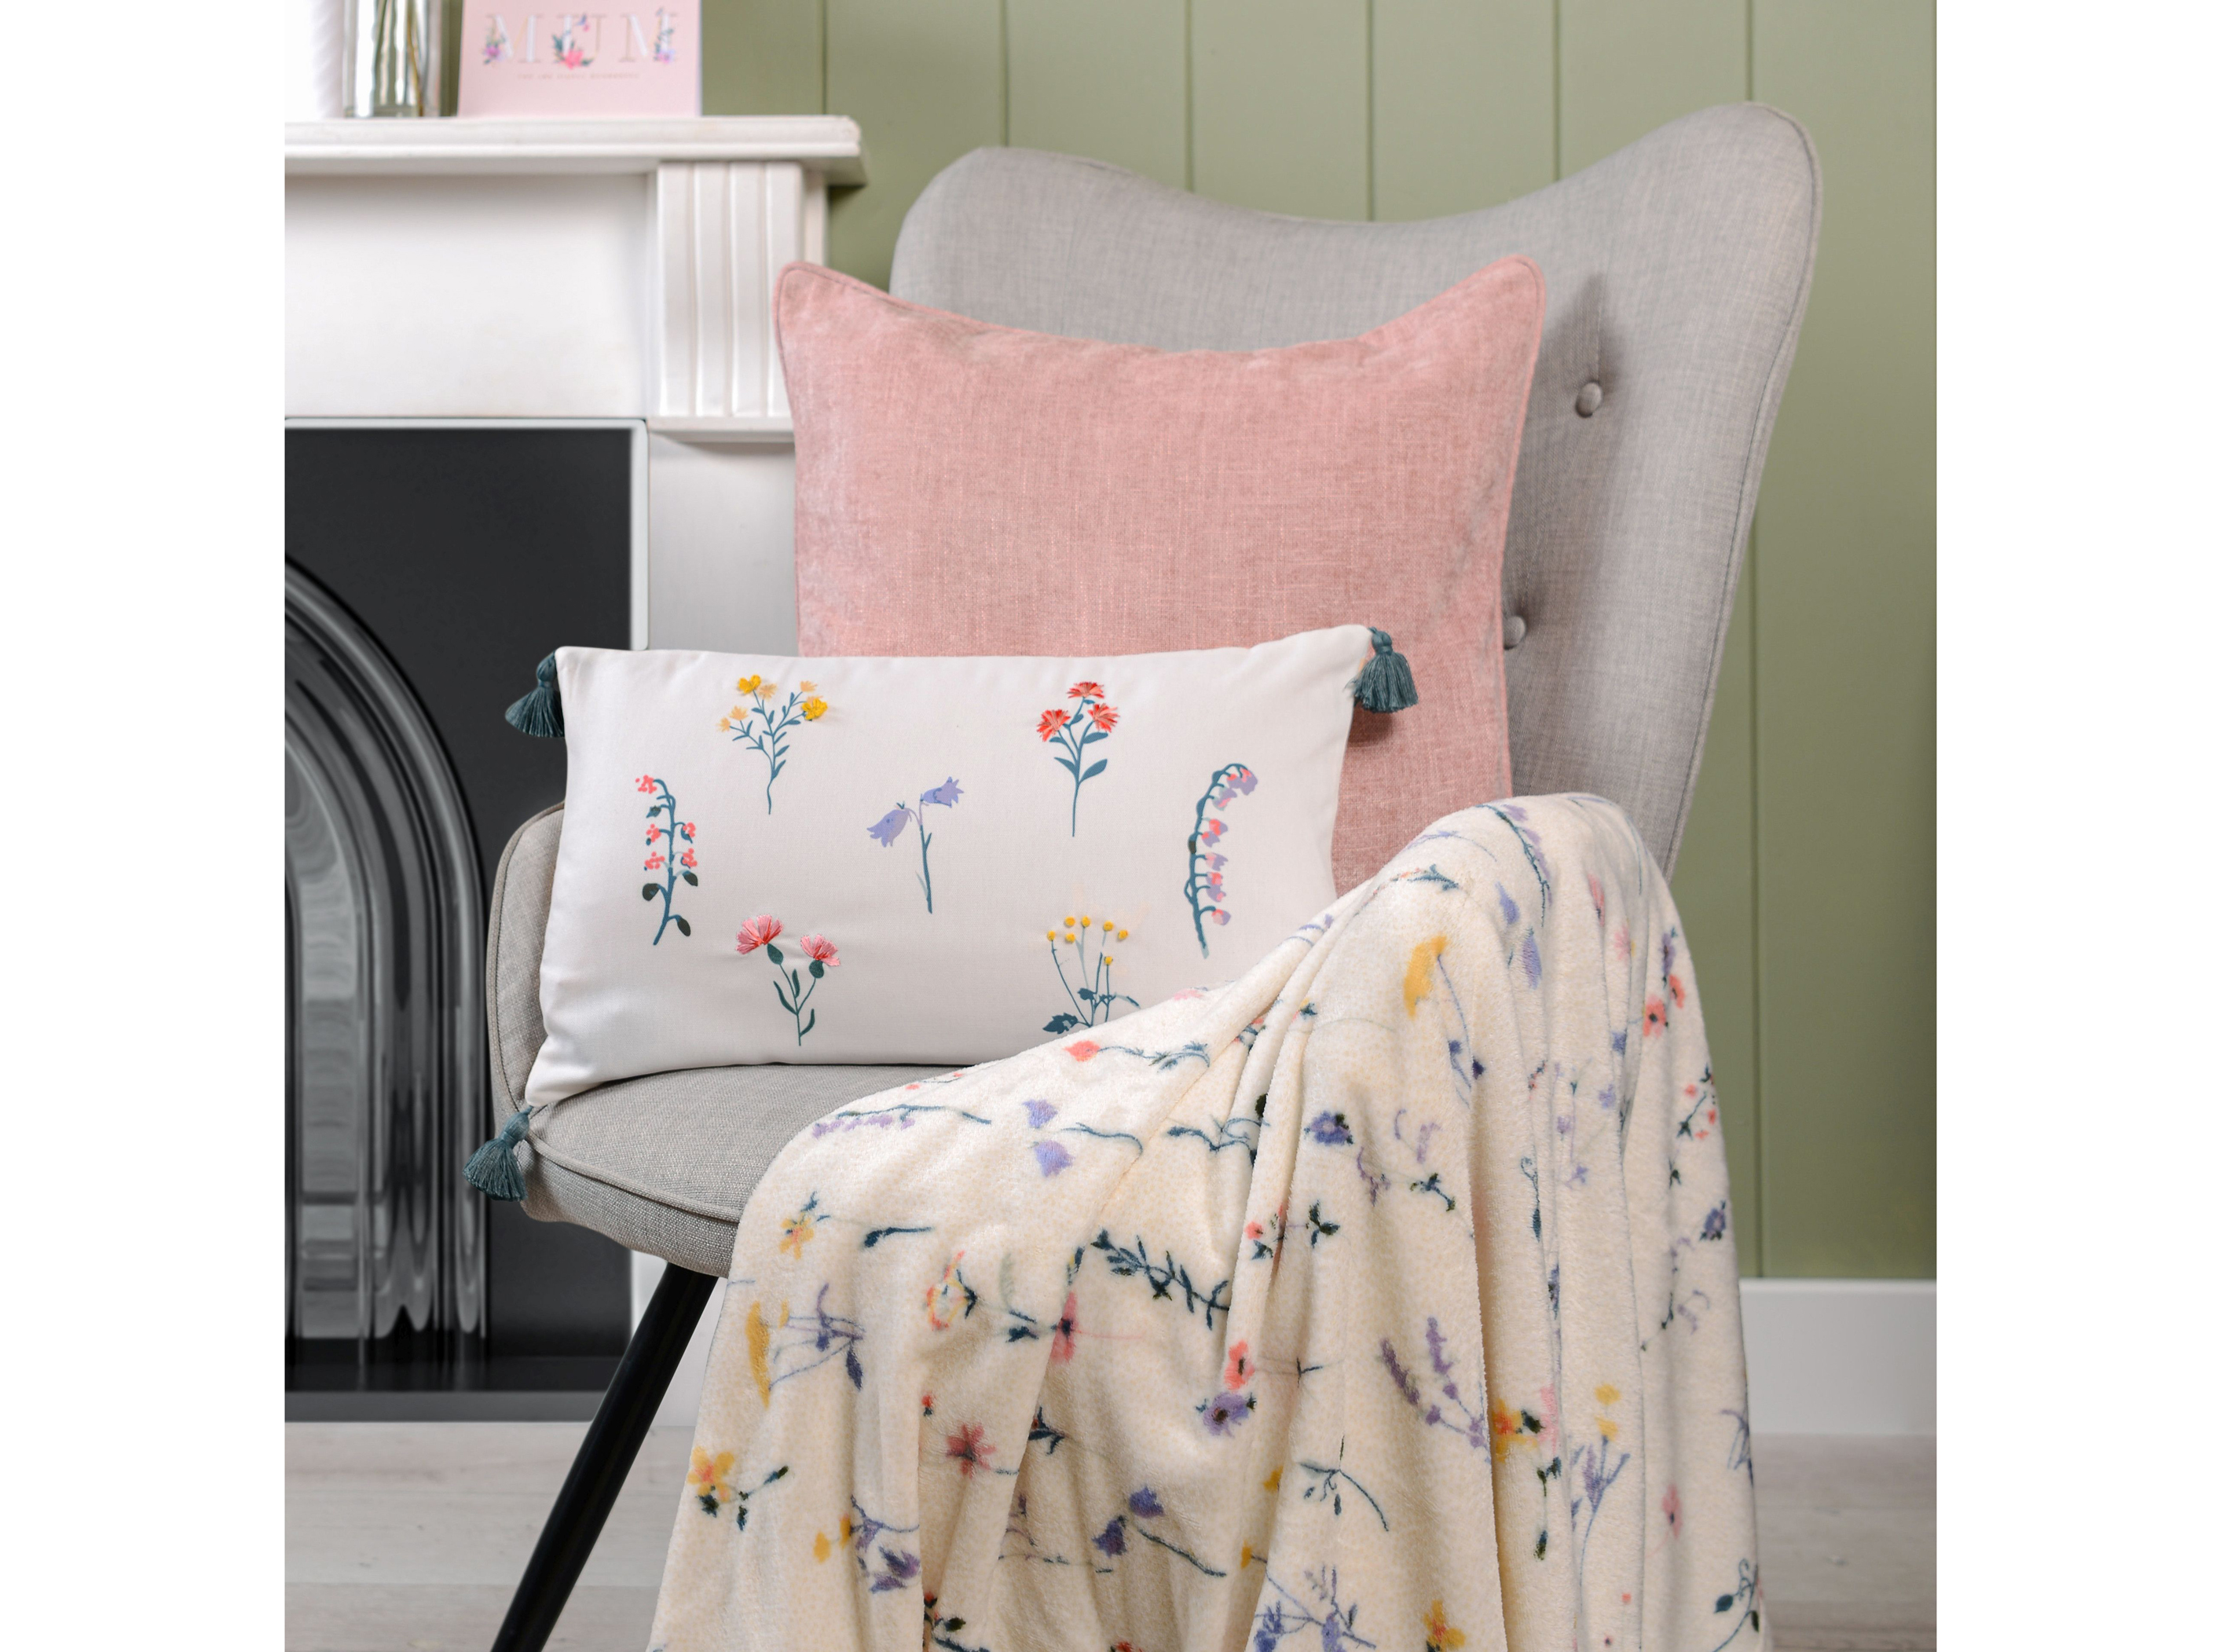 Meadow Flowers Fleece Throw – Yellow by My Home, £5.99, Meadow Flowers Embellished Cushion – White by Divante, £8.99, The Range